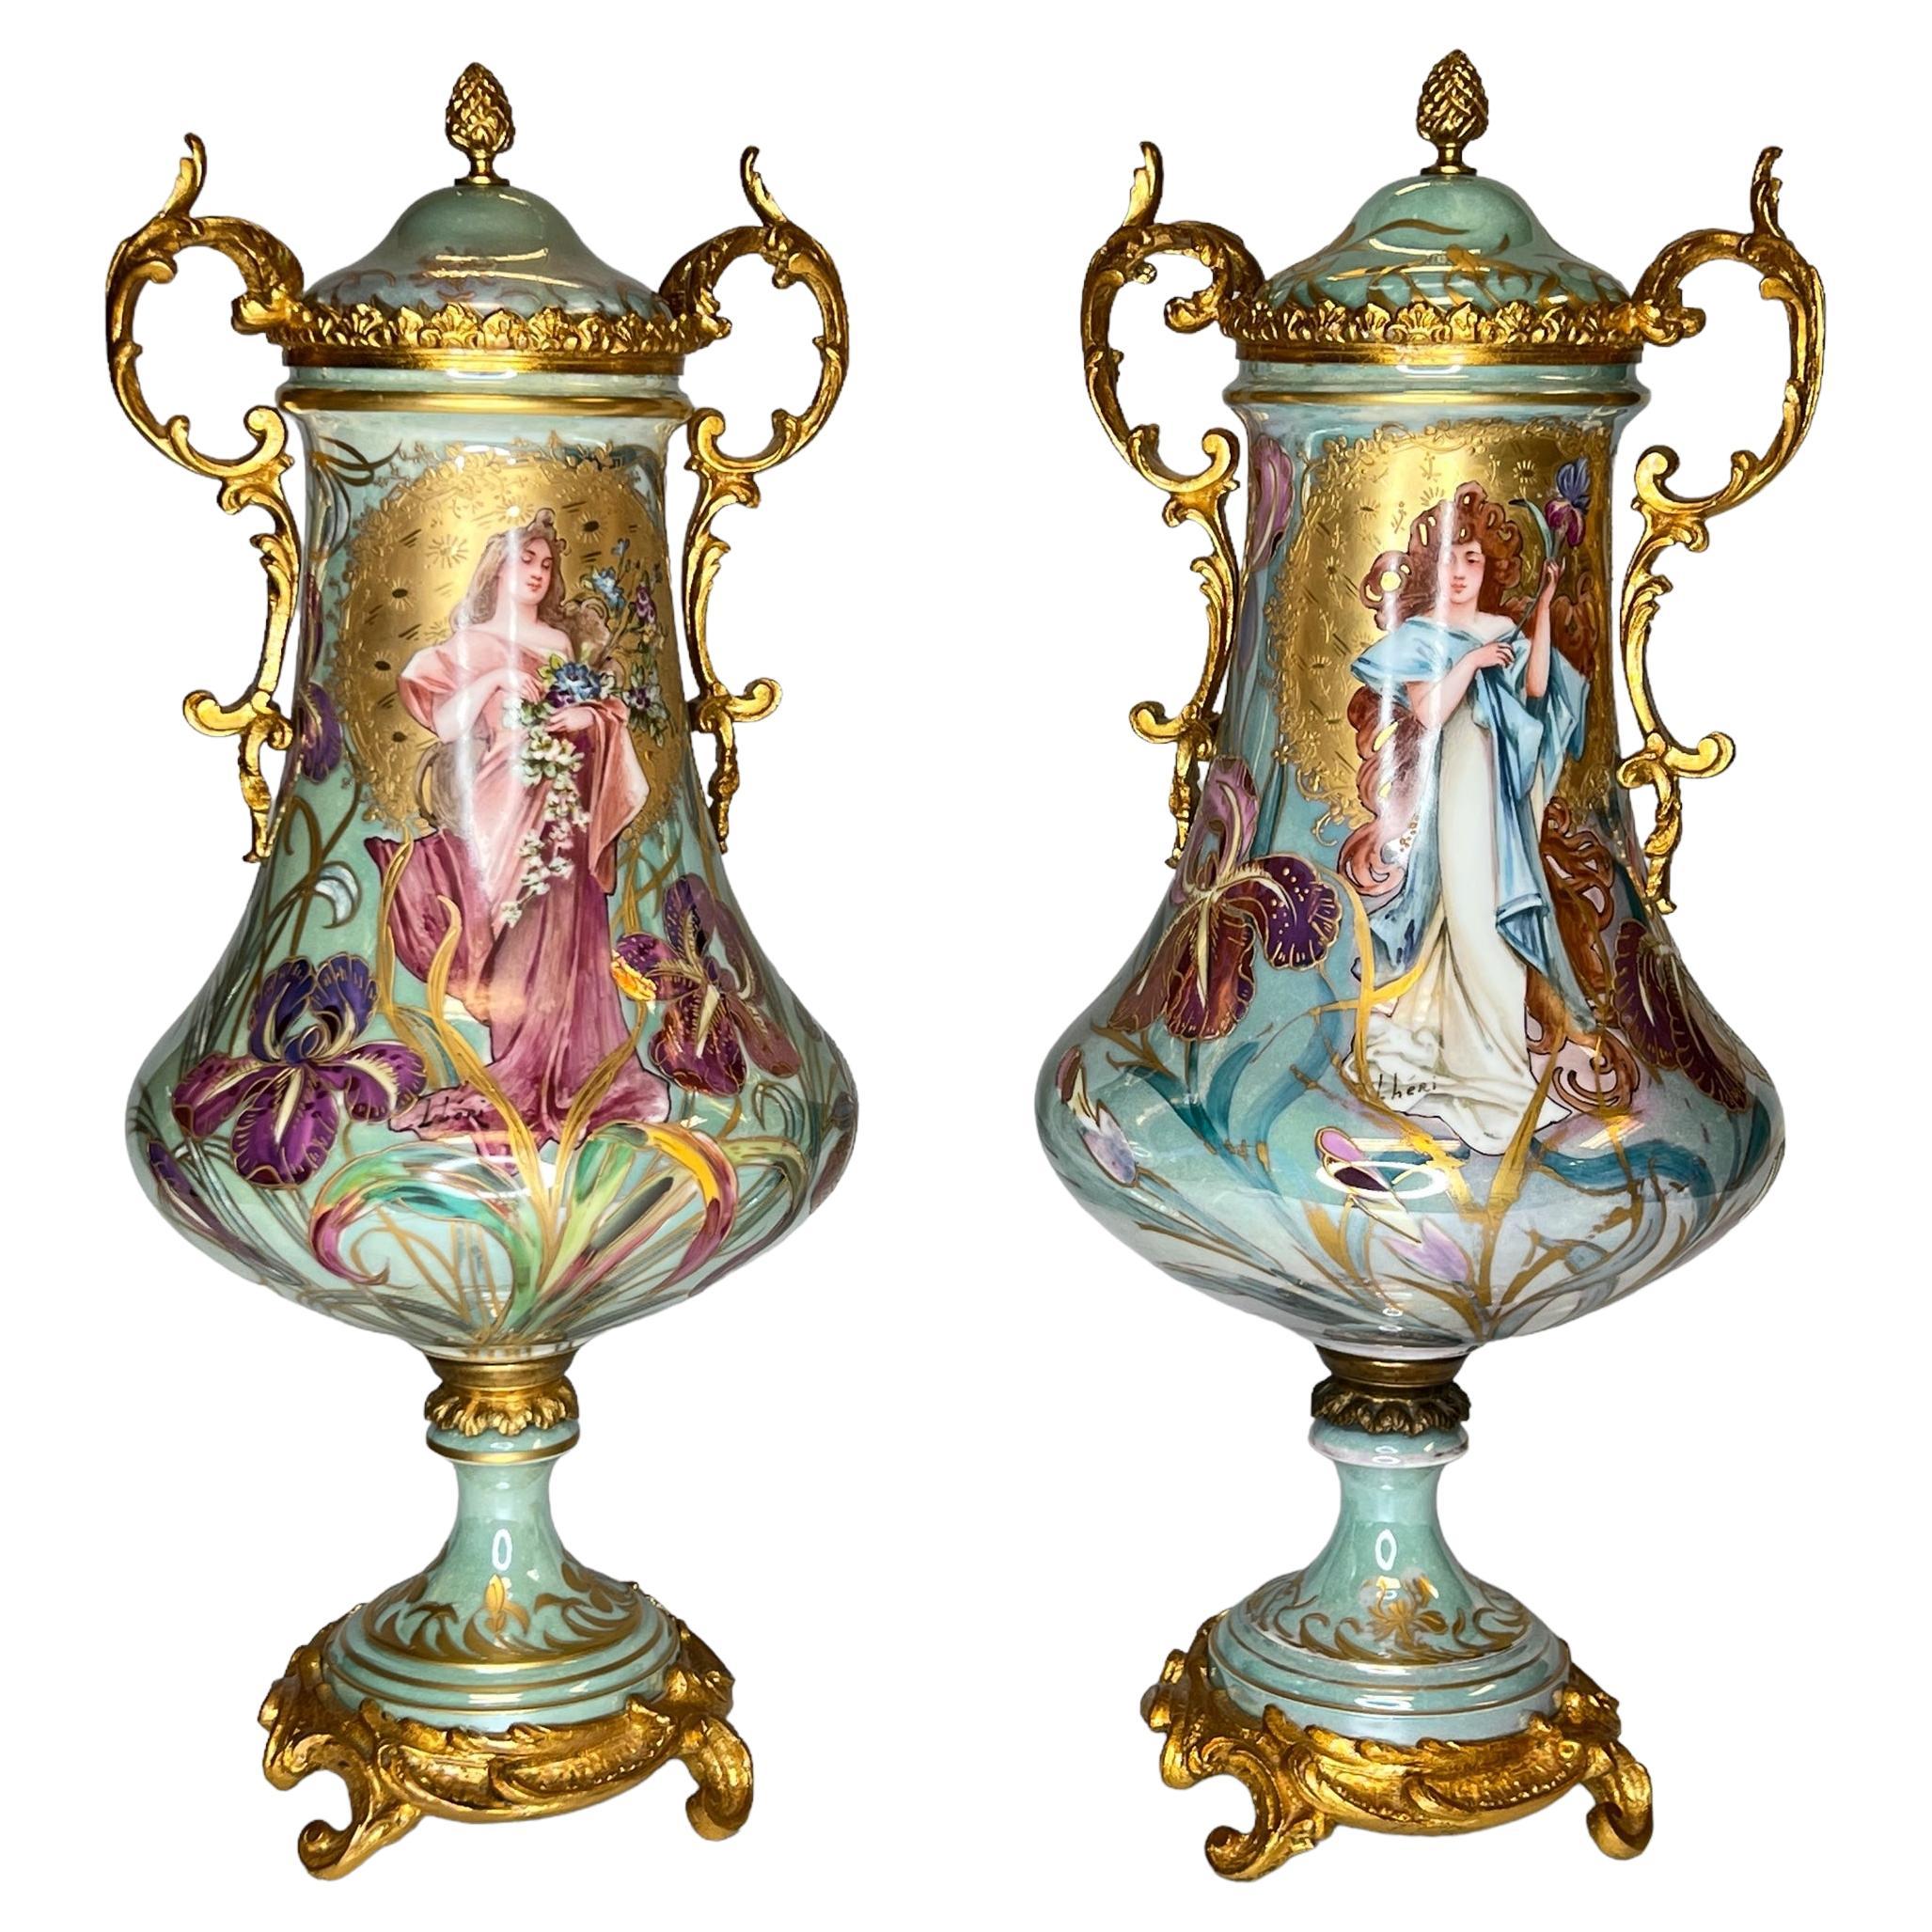 Pair of Art Nouveau Sevres Style Iridescent Porcelain Vases and Covers by Lheri